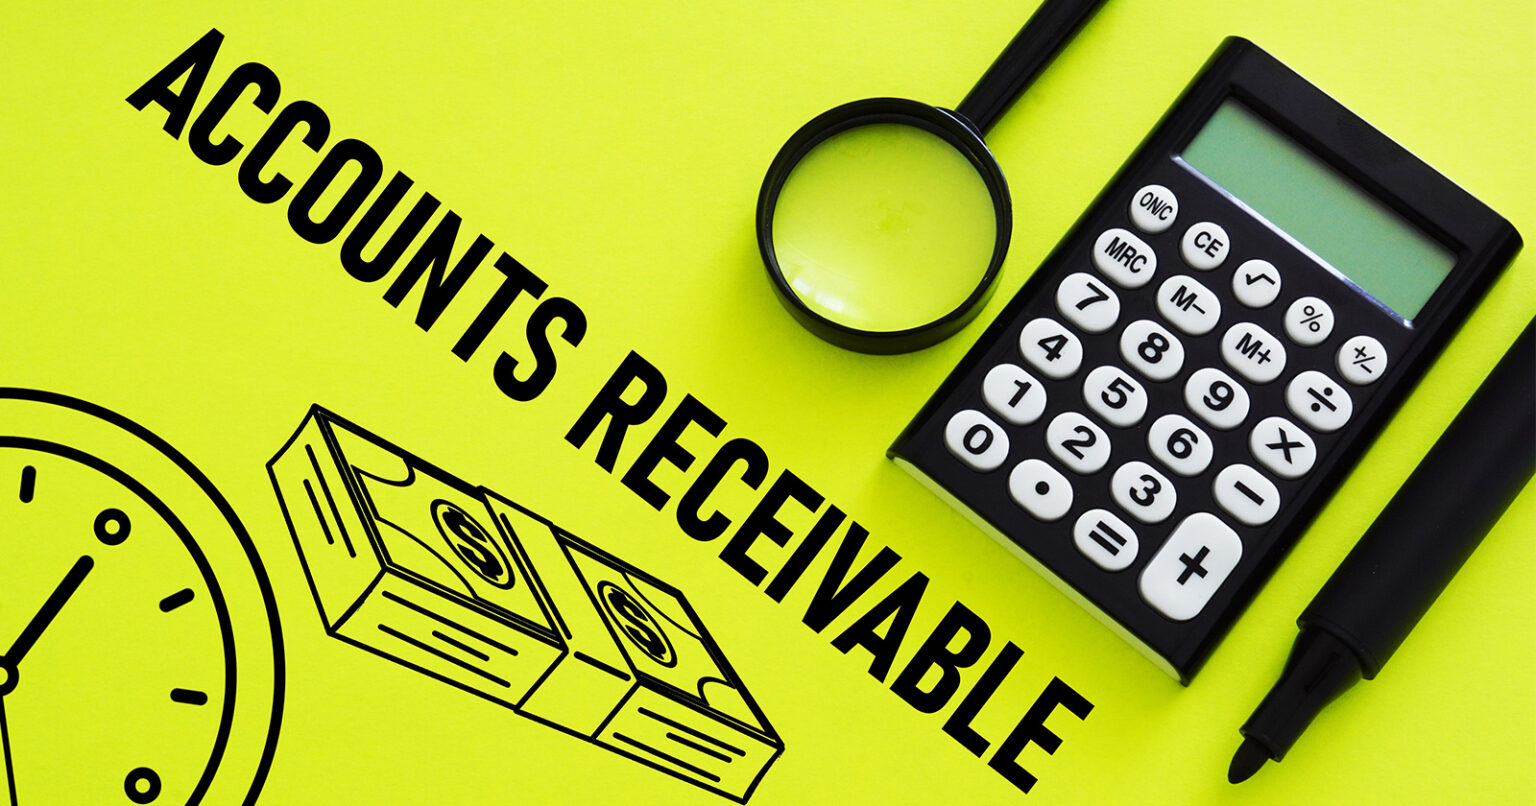 Accounts Receivable Meaning, Example & Accounting Definition